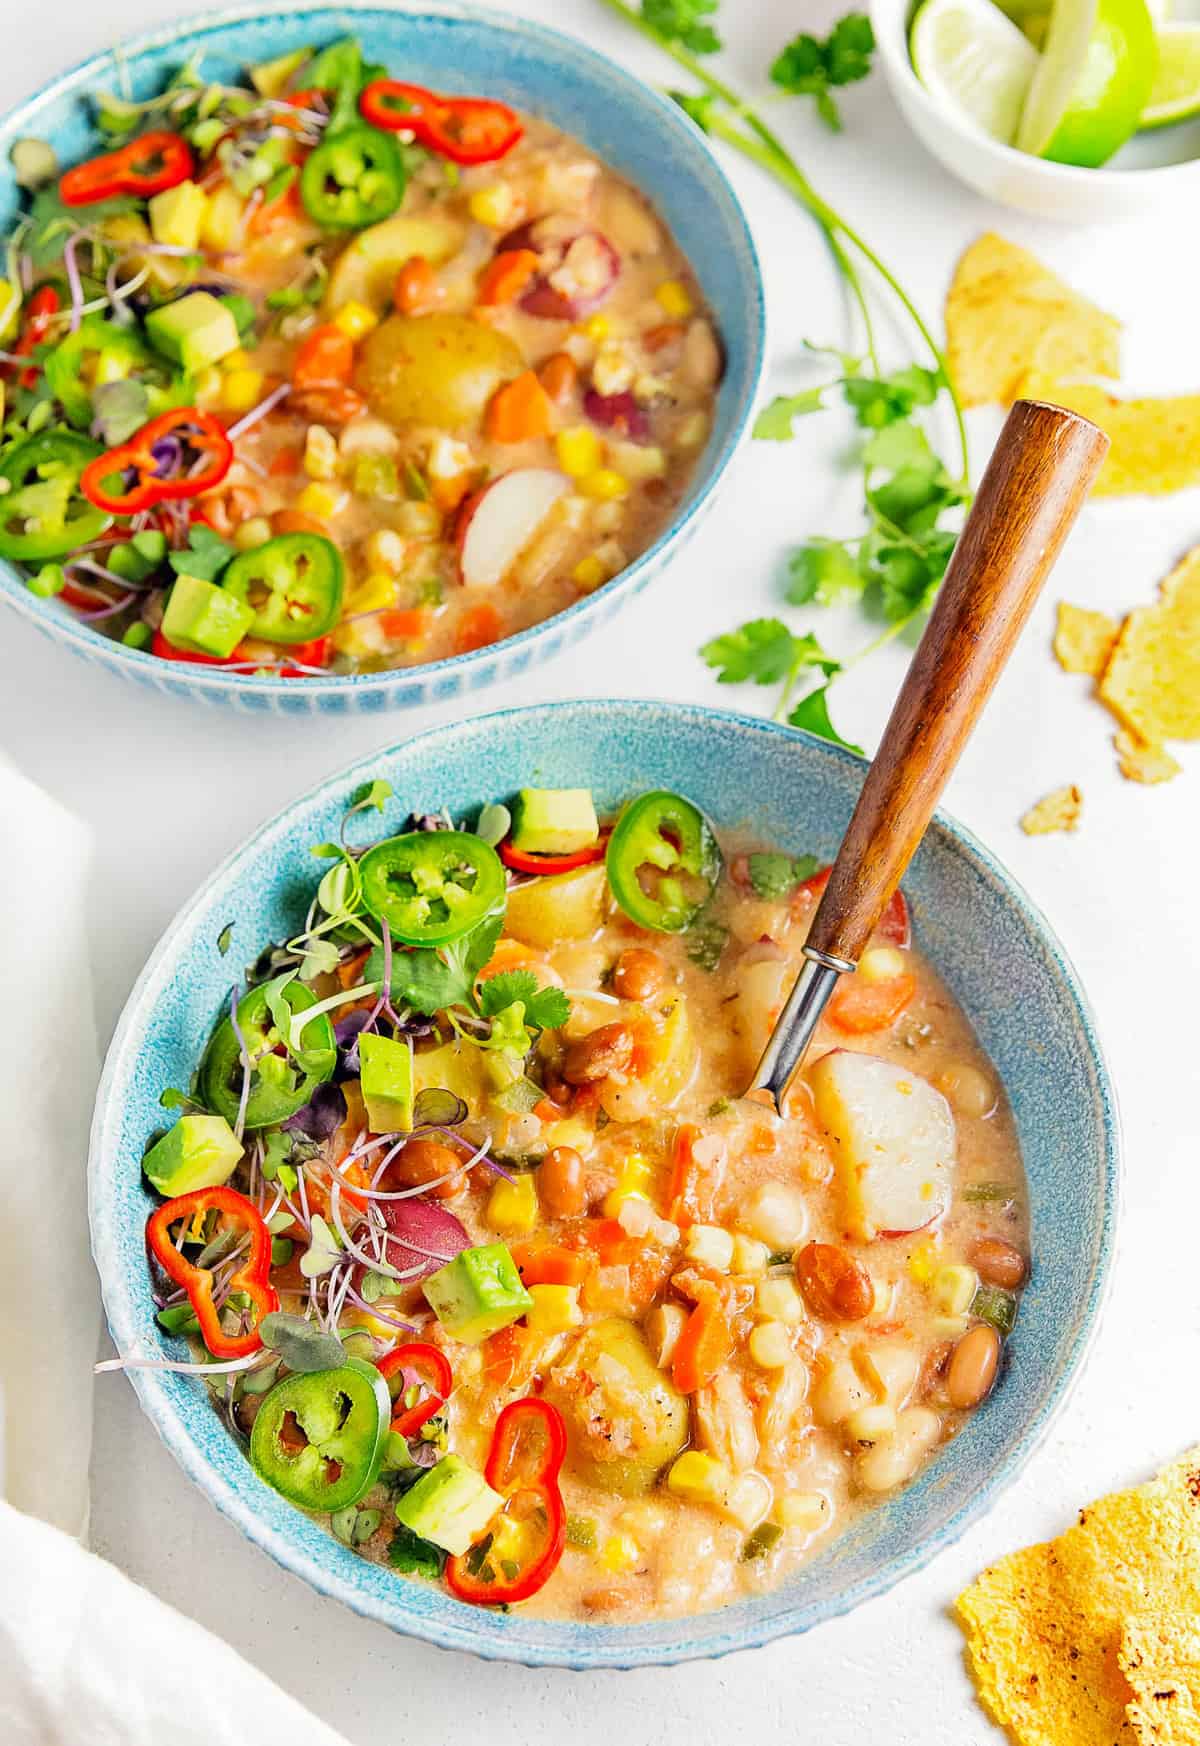 Creamy Southwestern Soup, plant based, vegan, vegetarian, whole food plant based, gluten free, recipe, wfpb, healthy, healthy vegan, oil free, no refined sugar, no oil, refined sugar free, dairy free, dinner party, entertaining, soup, stew